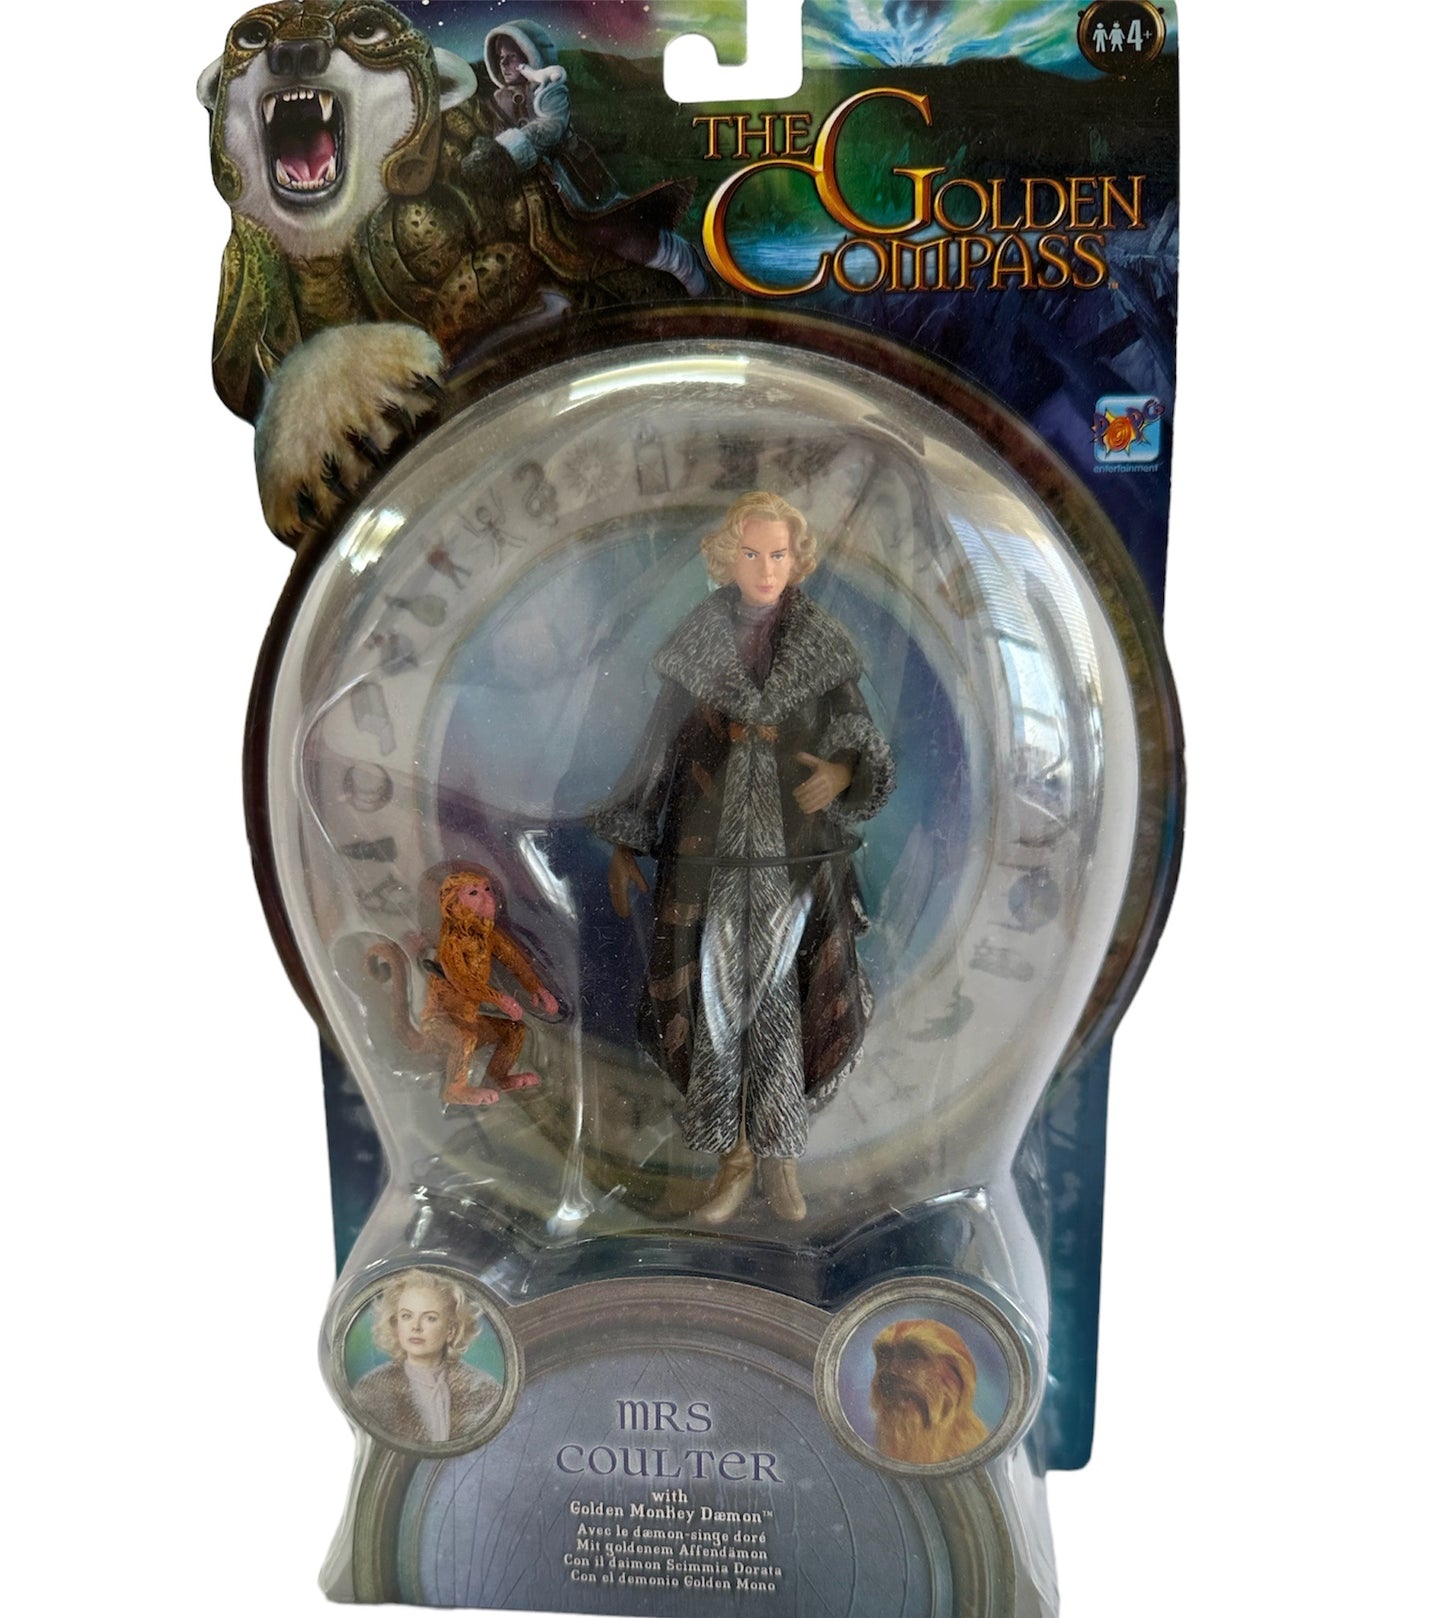 Vintage 2007 The Golden Compass - Mrs Coulter With Golden Monkey Demon Action Figure Set - Brand New Factory Sealed Shop Stock Room Find